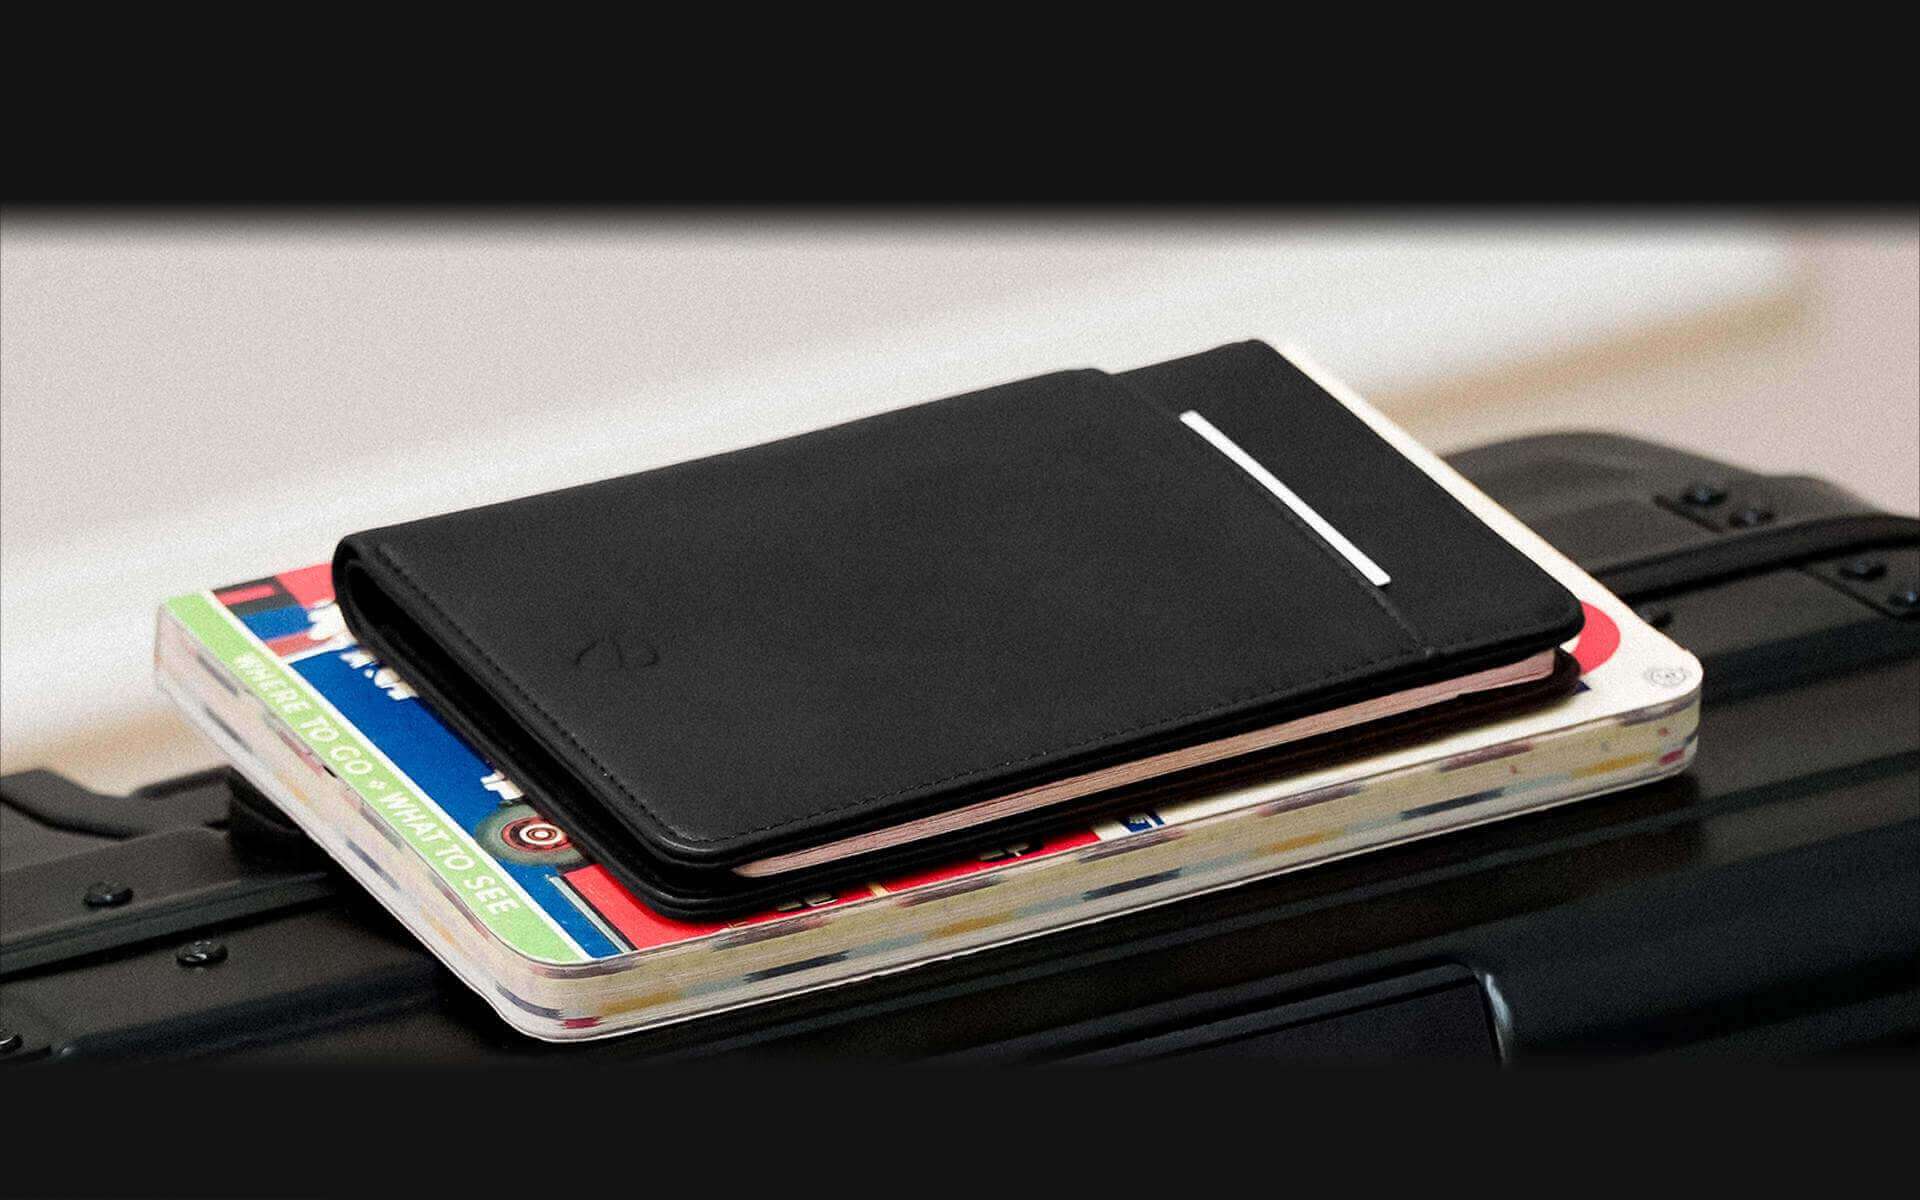 wallet to keep you travel items safe - Kensington by Vaultskin 